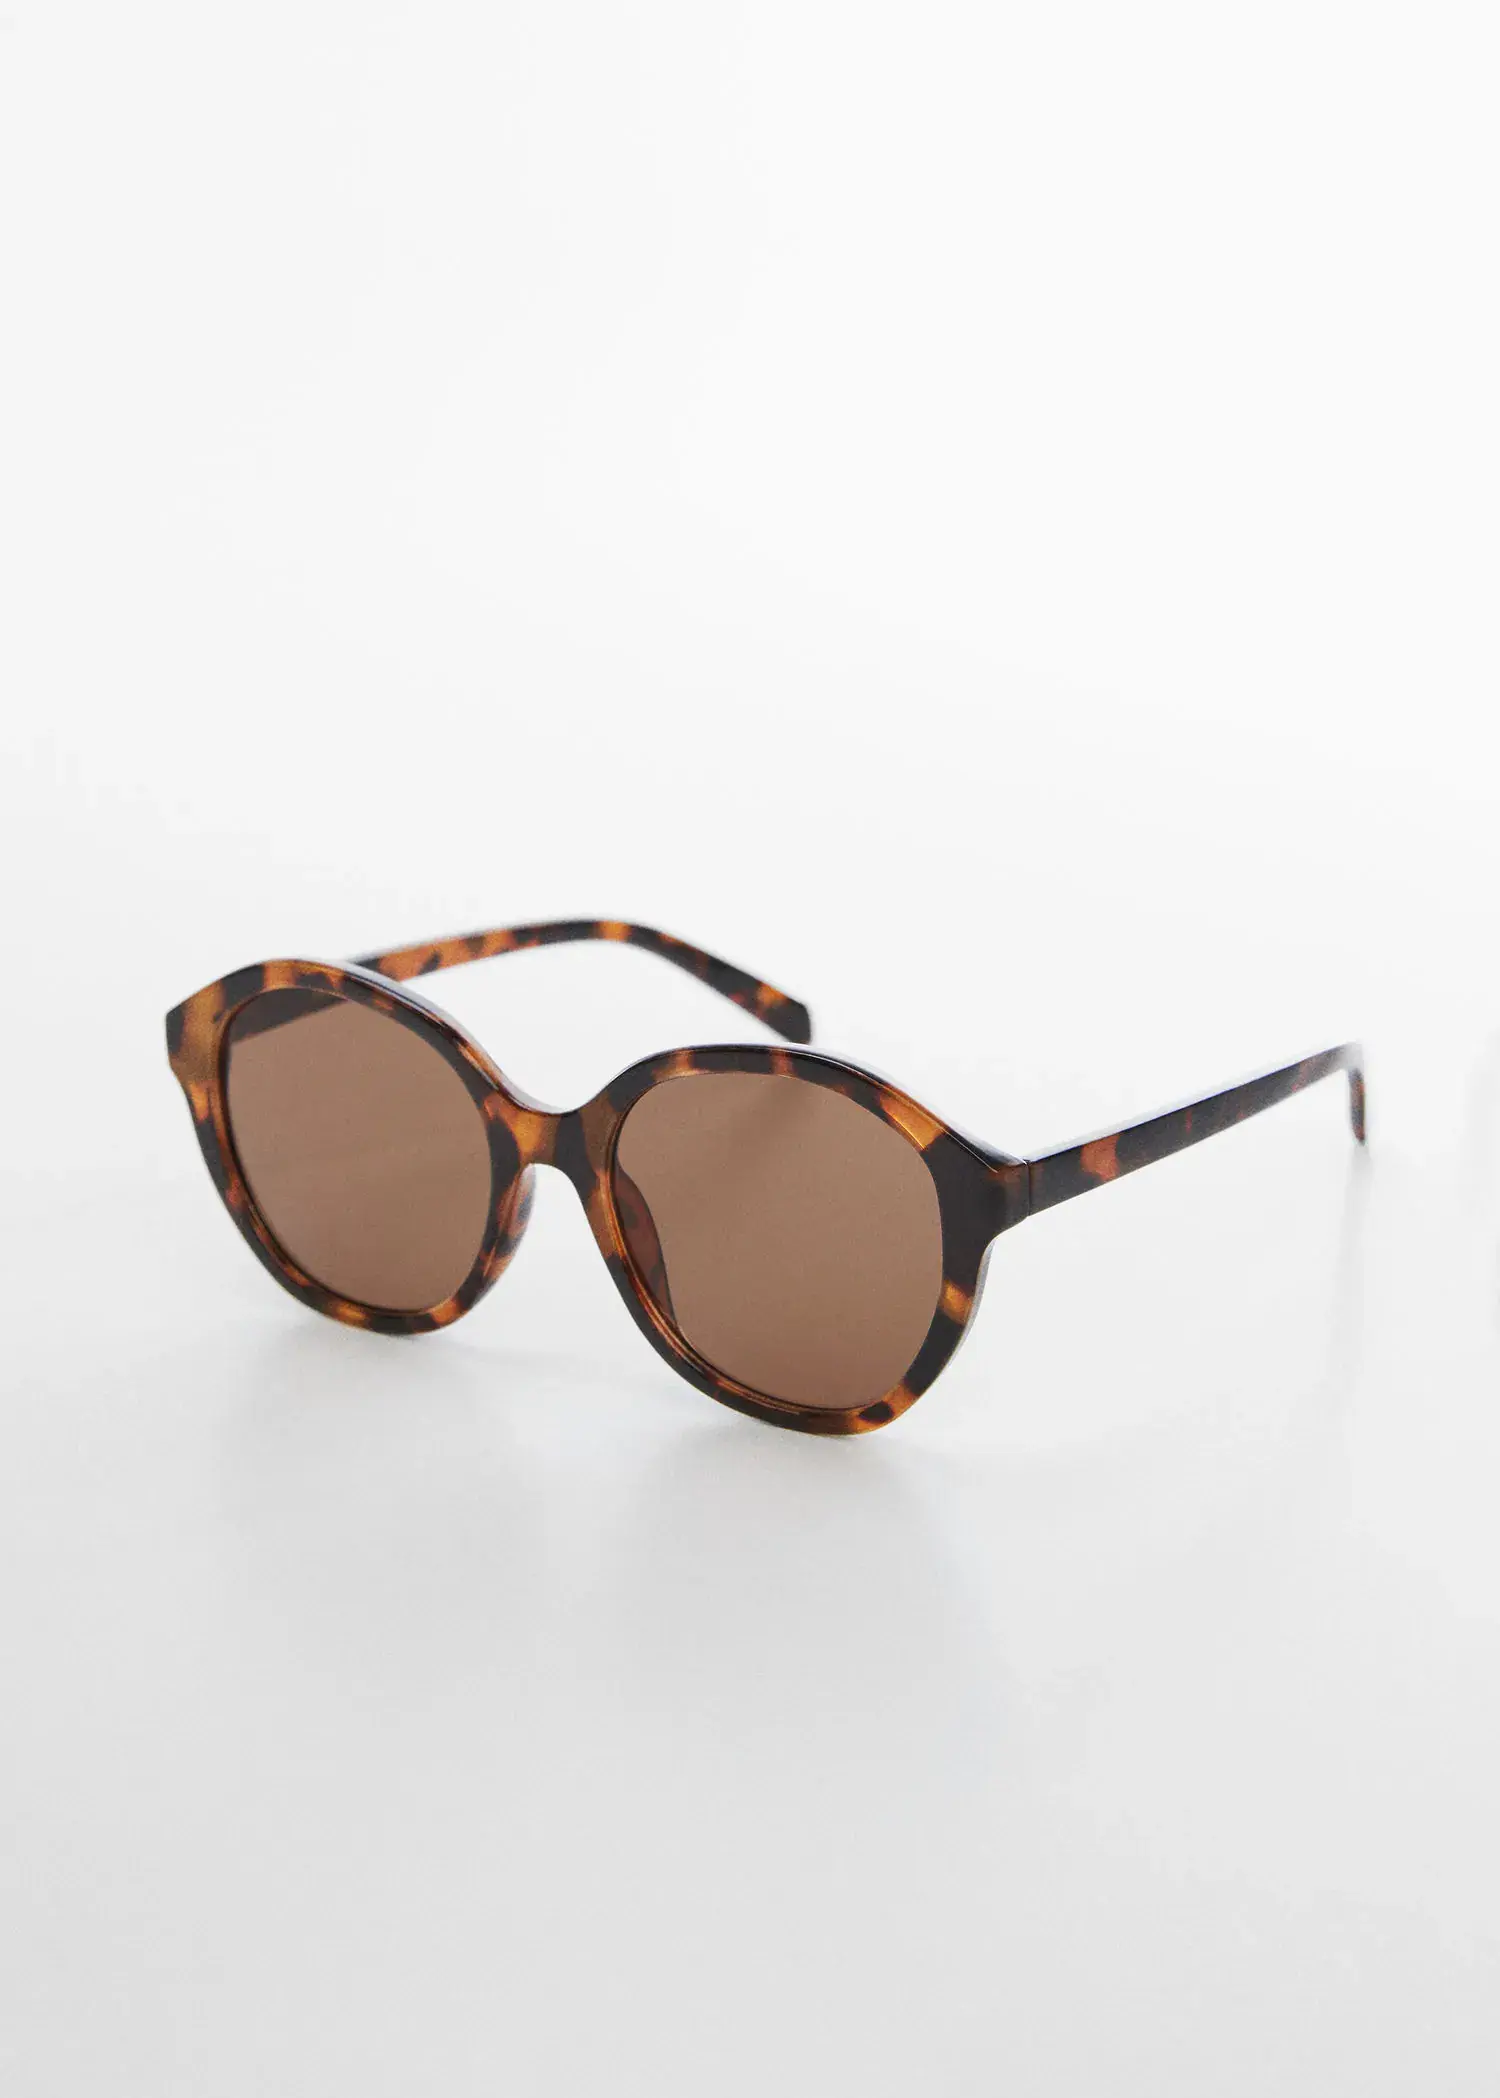 Mango Tortoiseshell rounded sunglasses. a pair of sunglasses sitting on top of a white table. 